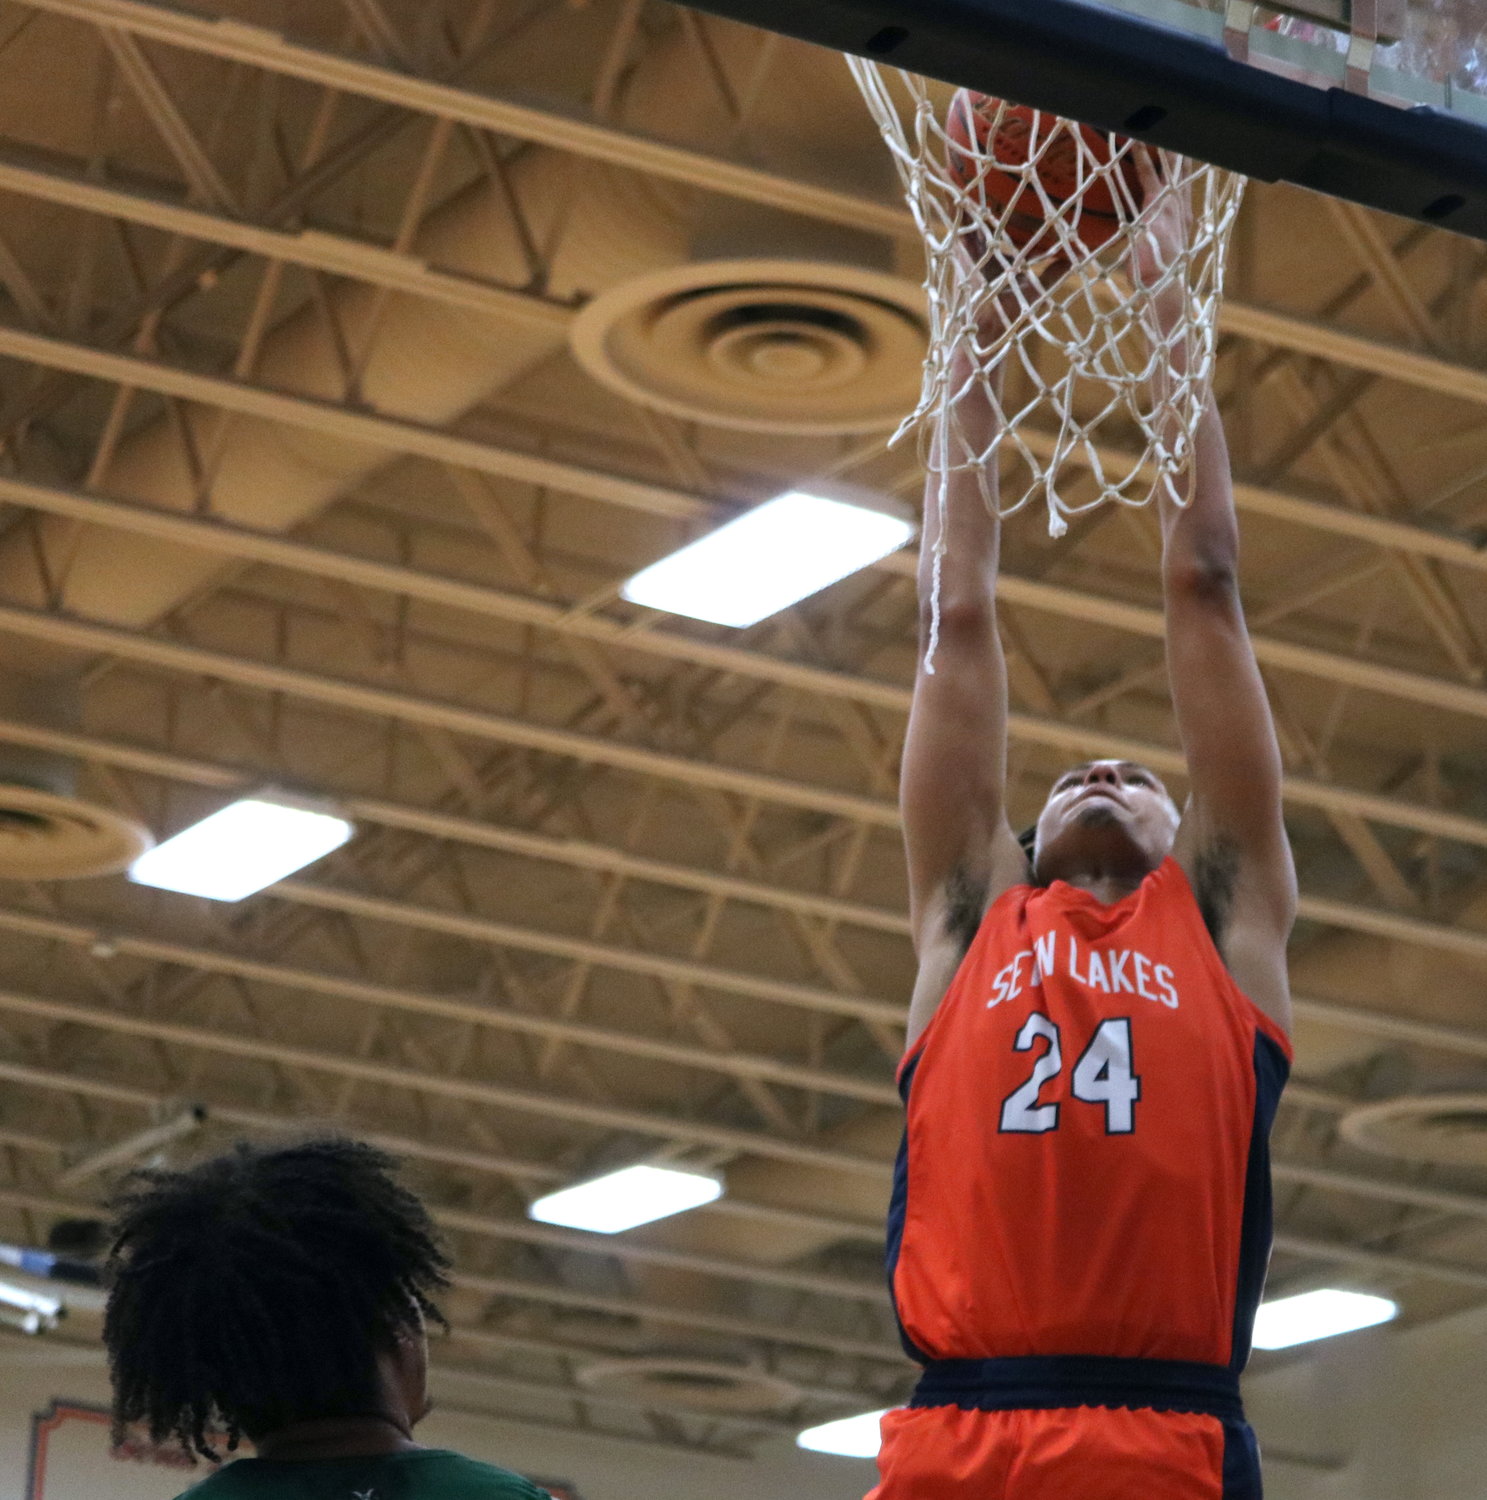 AJ Bates dunks the ball during Monday’s game between Seven Lakes and Mayde Creek at the Seven Lakes gym.